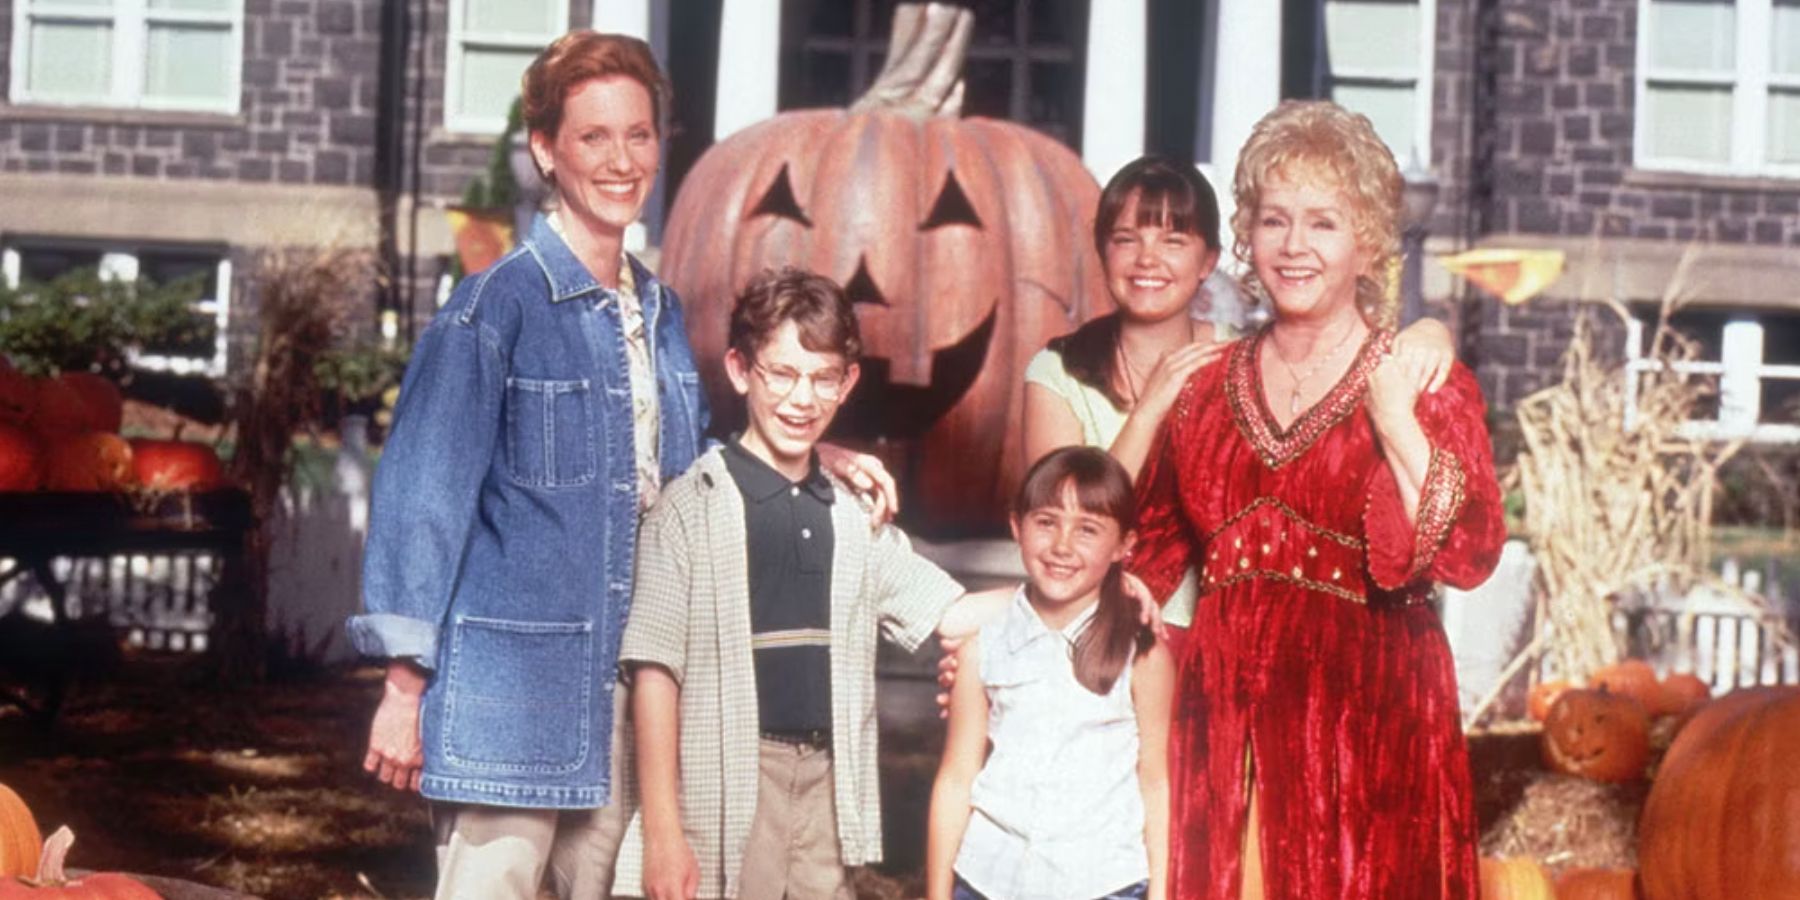 The Cromwell-Piper family in front of a pumpkin patch in Halloweentown